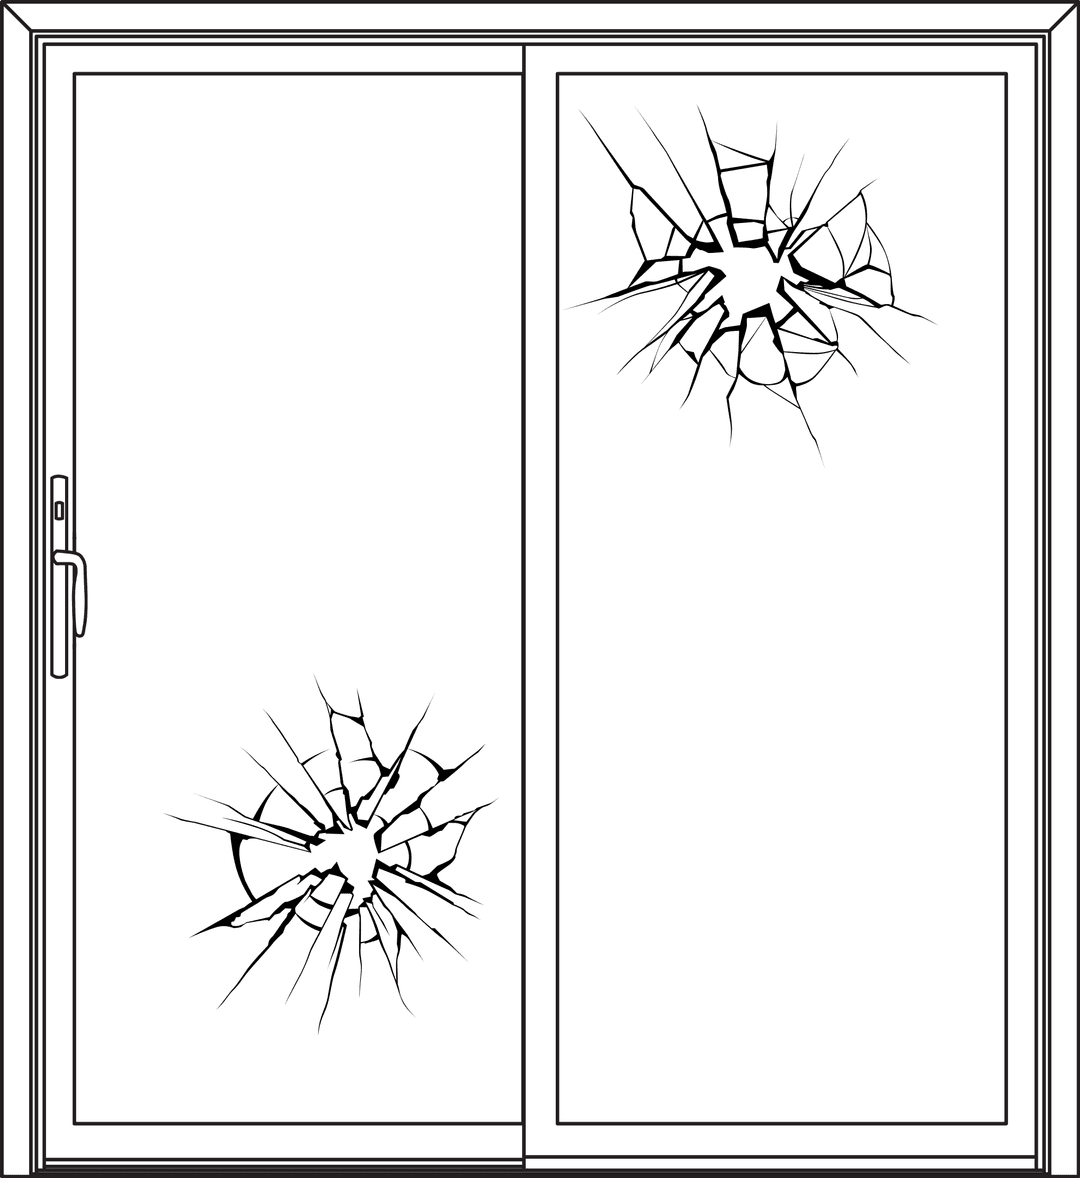 A line drawing of a sliding door with cracks in the glass.